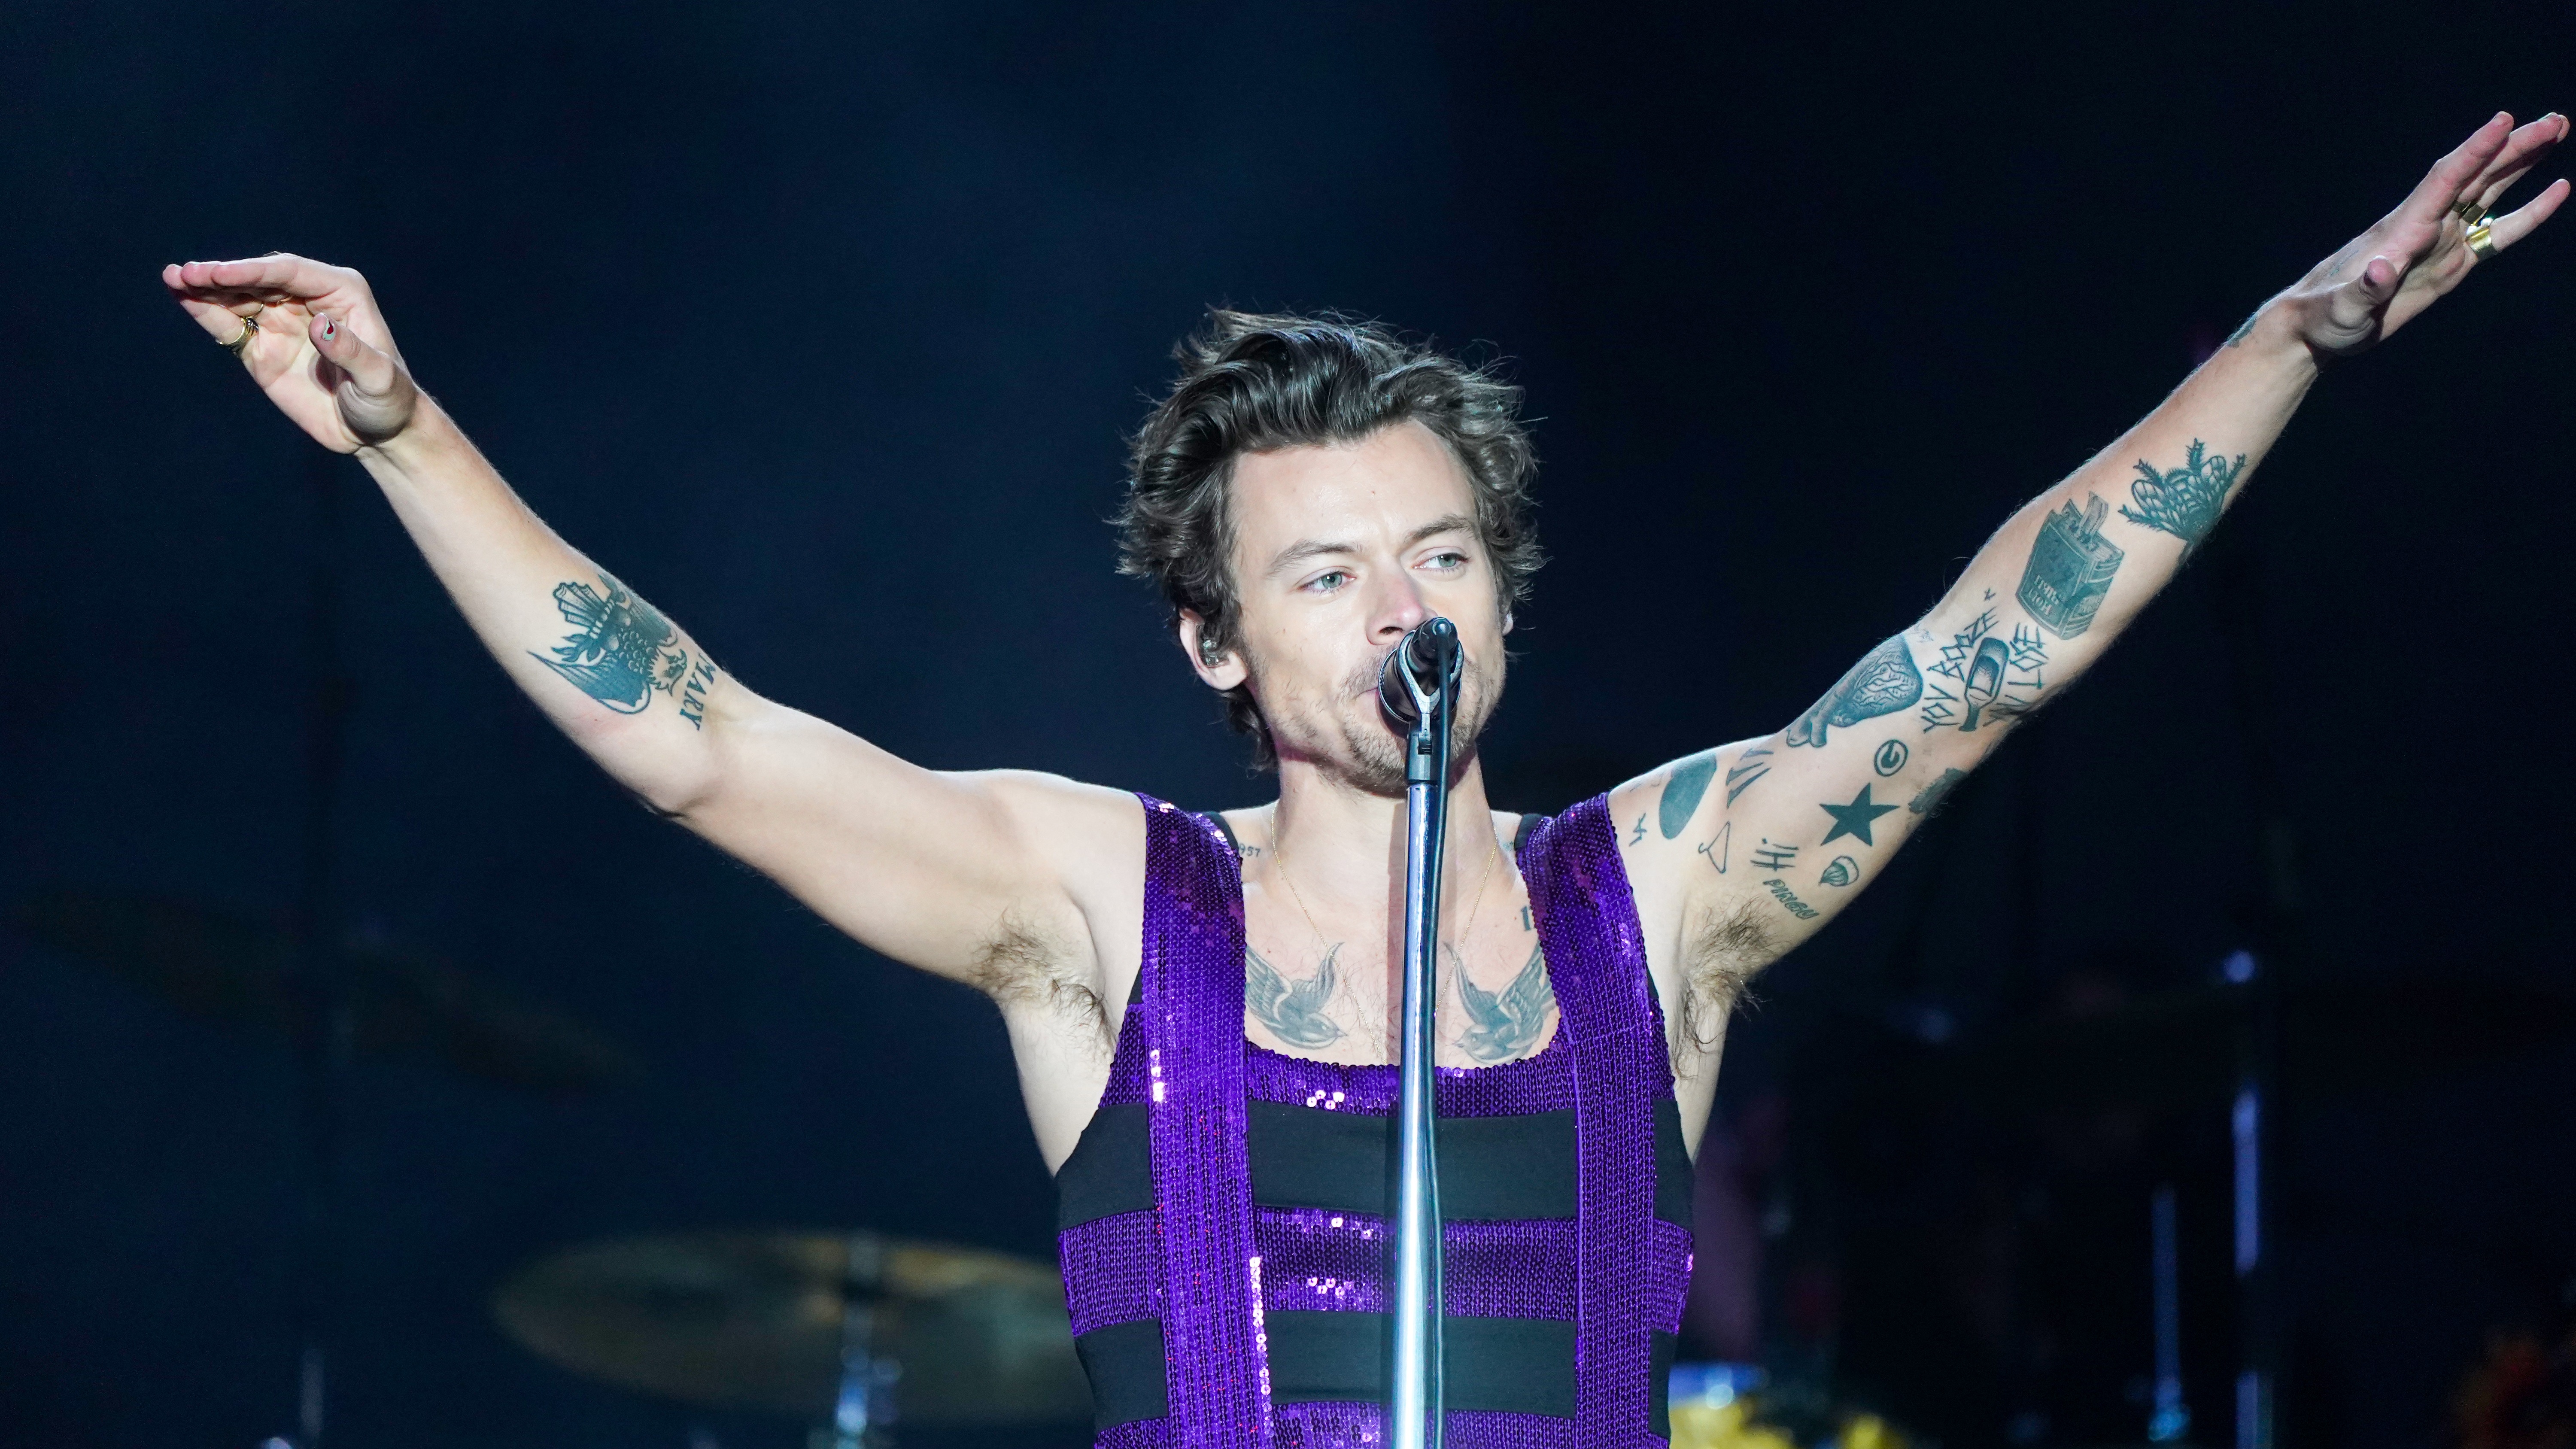 Cardiff: Road closures and travel advice ahead of Harry Styles concert